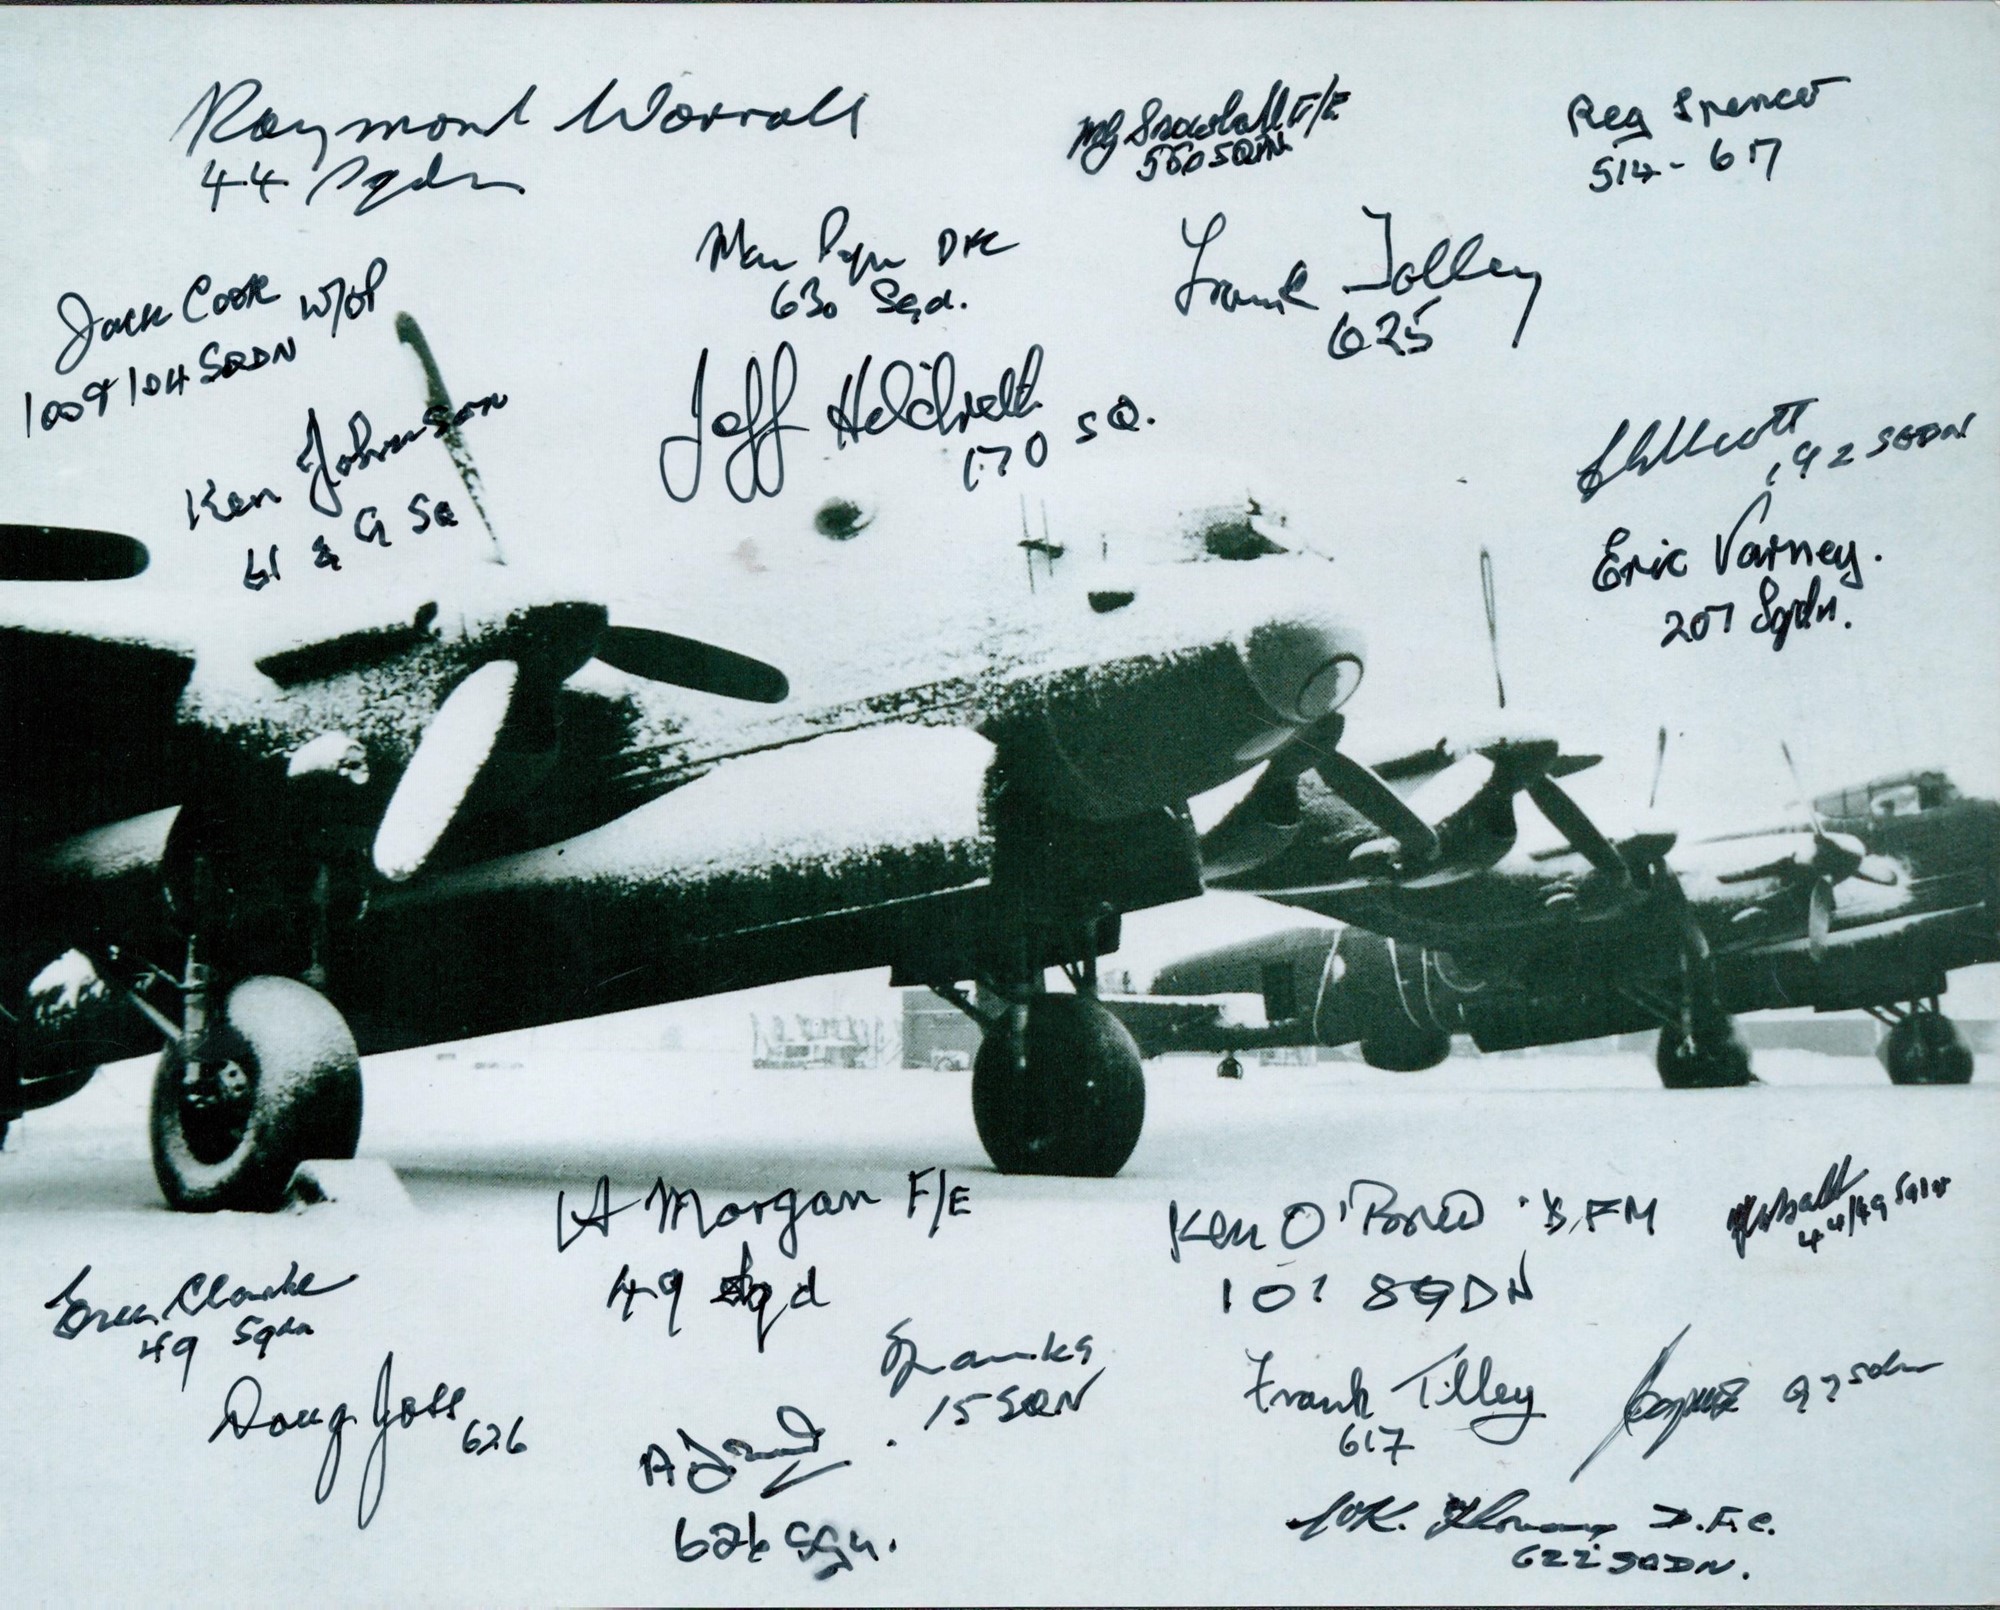 World War II Lancaster multi signed 10x8 black and white photo includes 20 Bomber command veterans